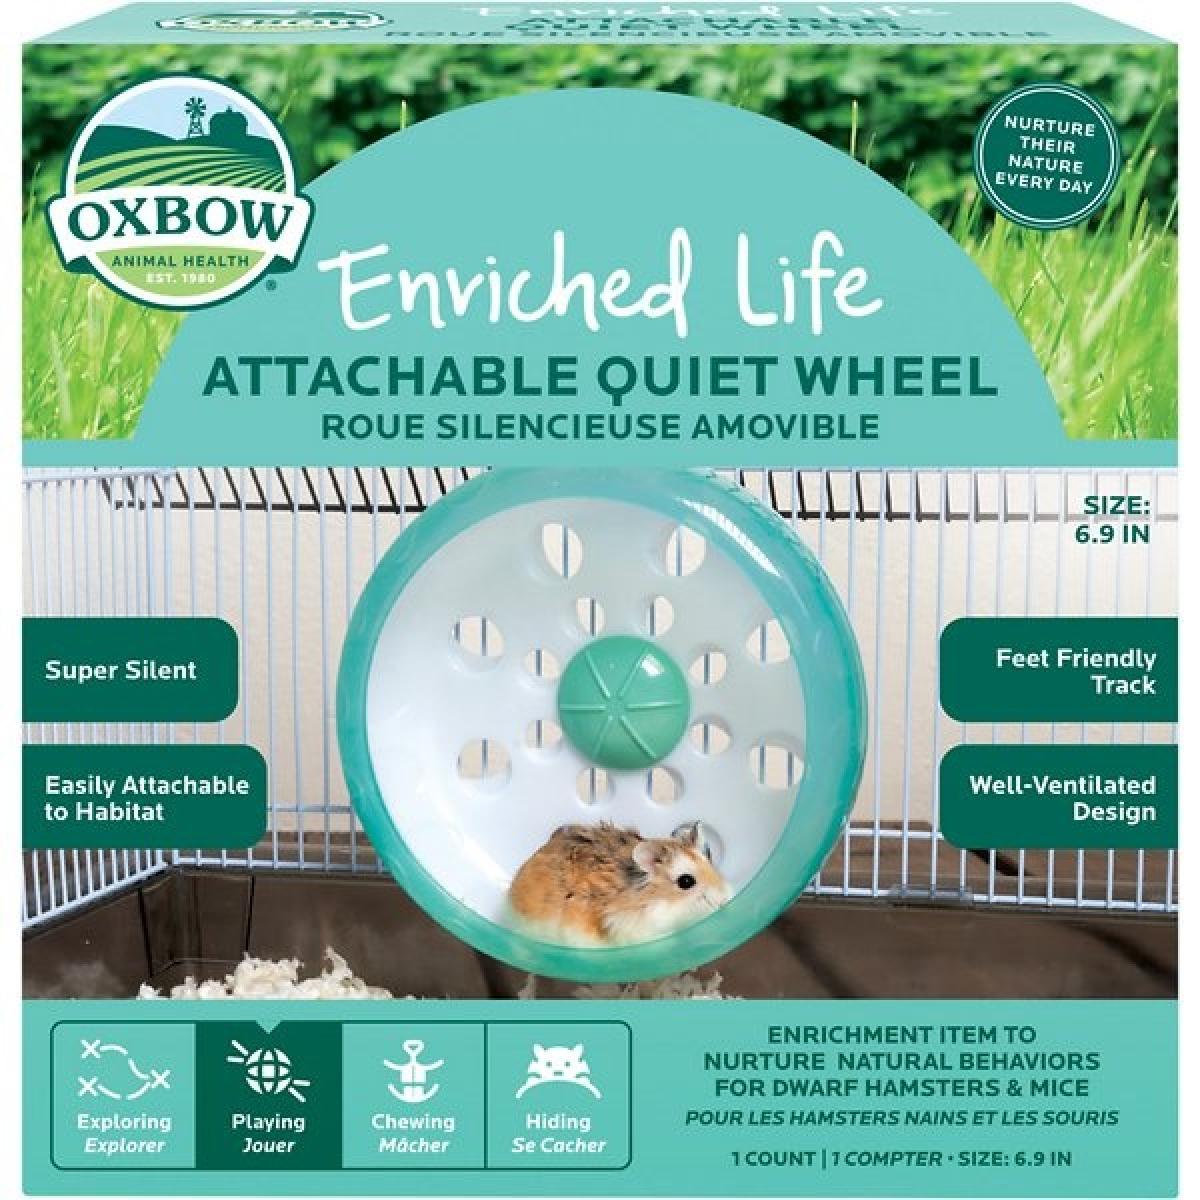 Oxbow Enriched Life Attachable Quiet Wheel